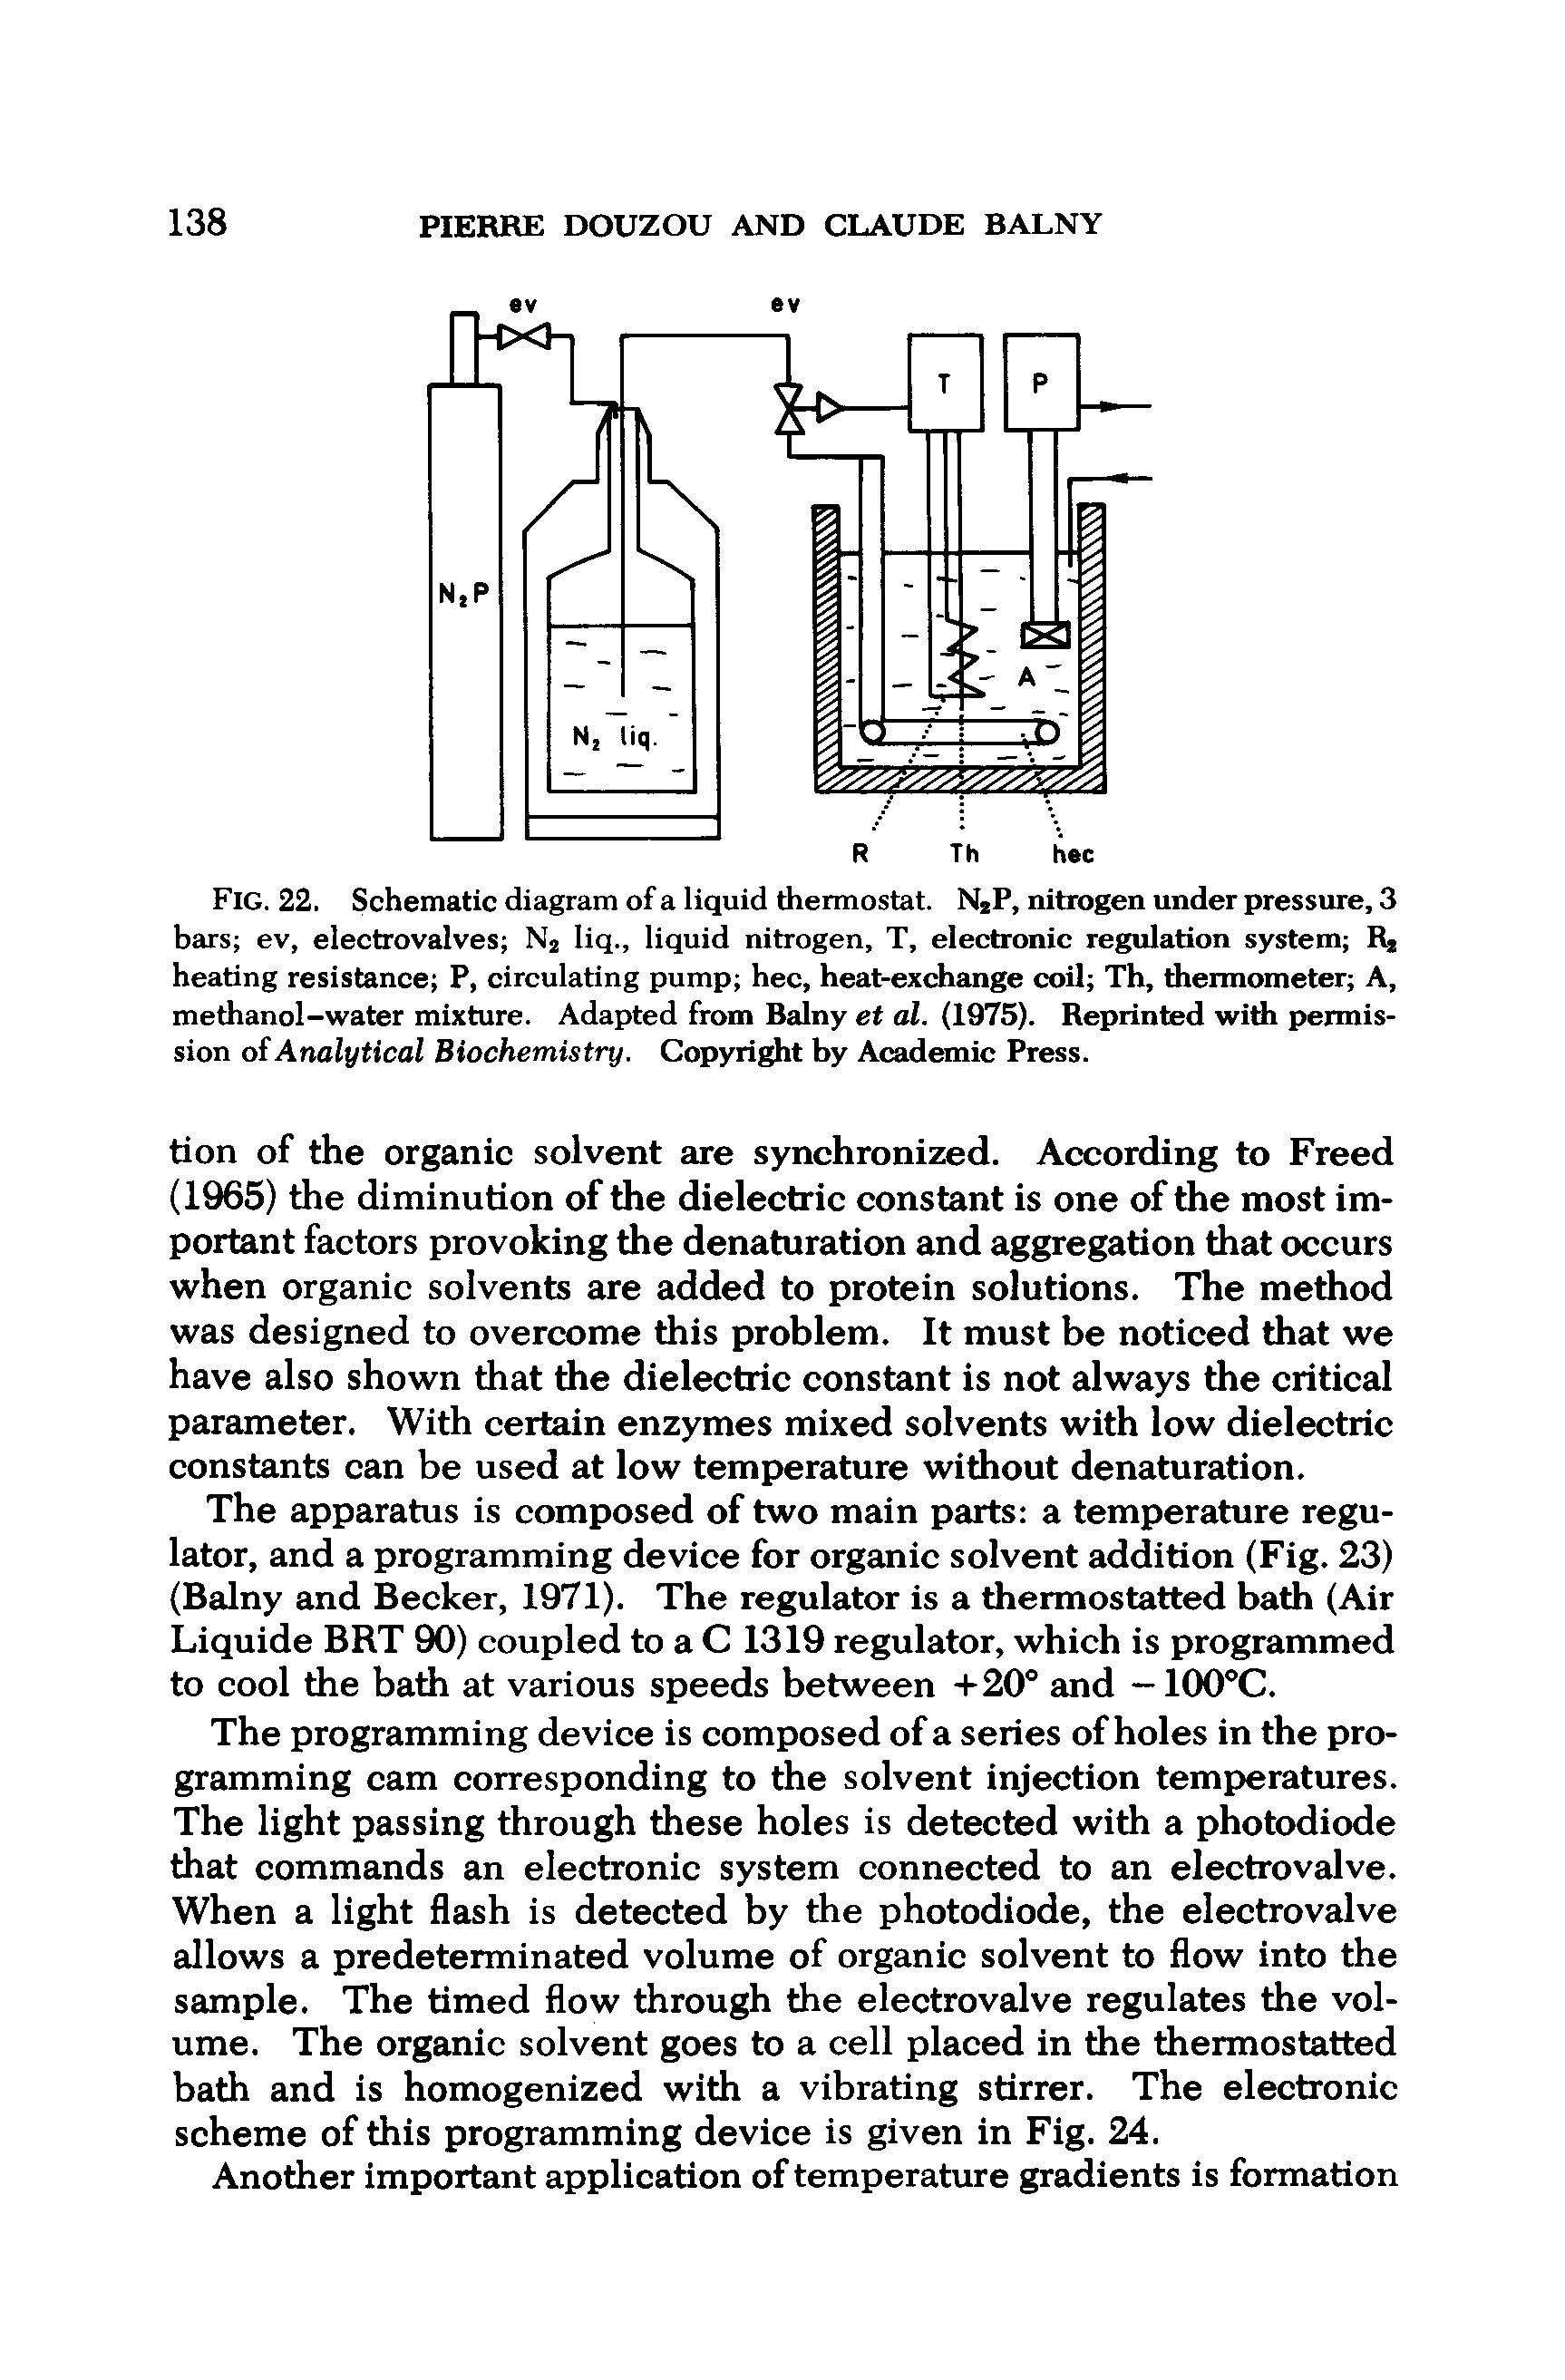 Fig. 22. Schematic diagram of a liquid thermostat. N2P, nitrogen under pressure, 3 bars ev, electrovalves N2 liq., liquid nitrogen, T, electronic regulation system Rj heating resistance P, circulating pump hec, heat-exchange coil Th, thermometer A, methanol-water mixture. Adapted from Balny et al. (1975). Reprinted with permission of Analytical Biochemistry. Copyright by Academic Press.